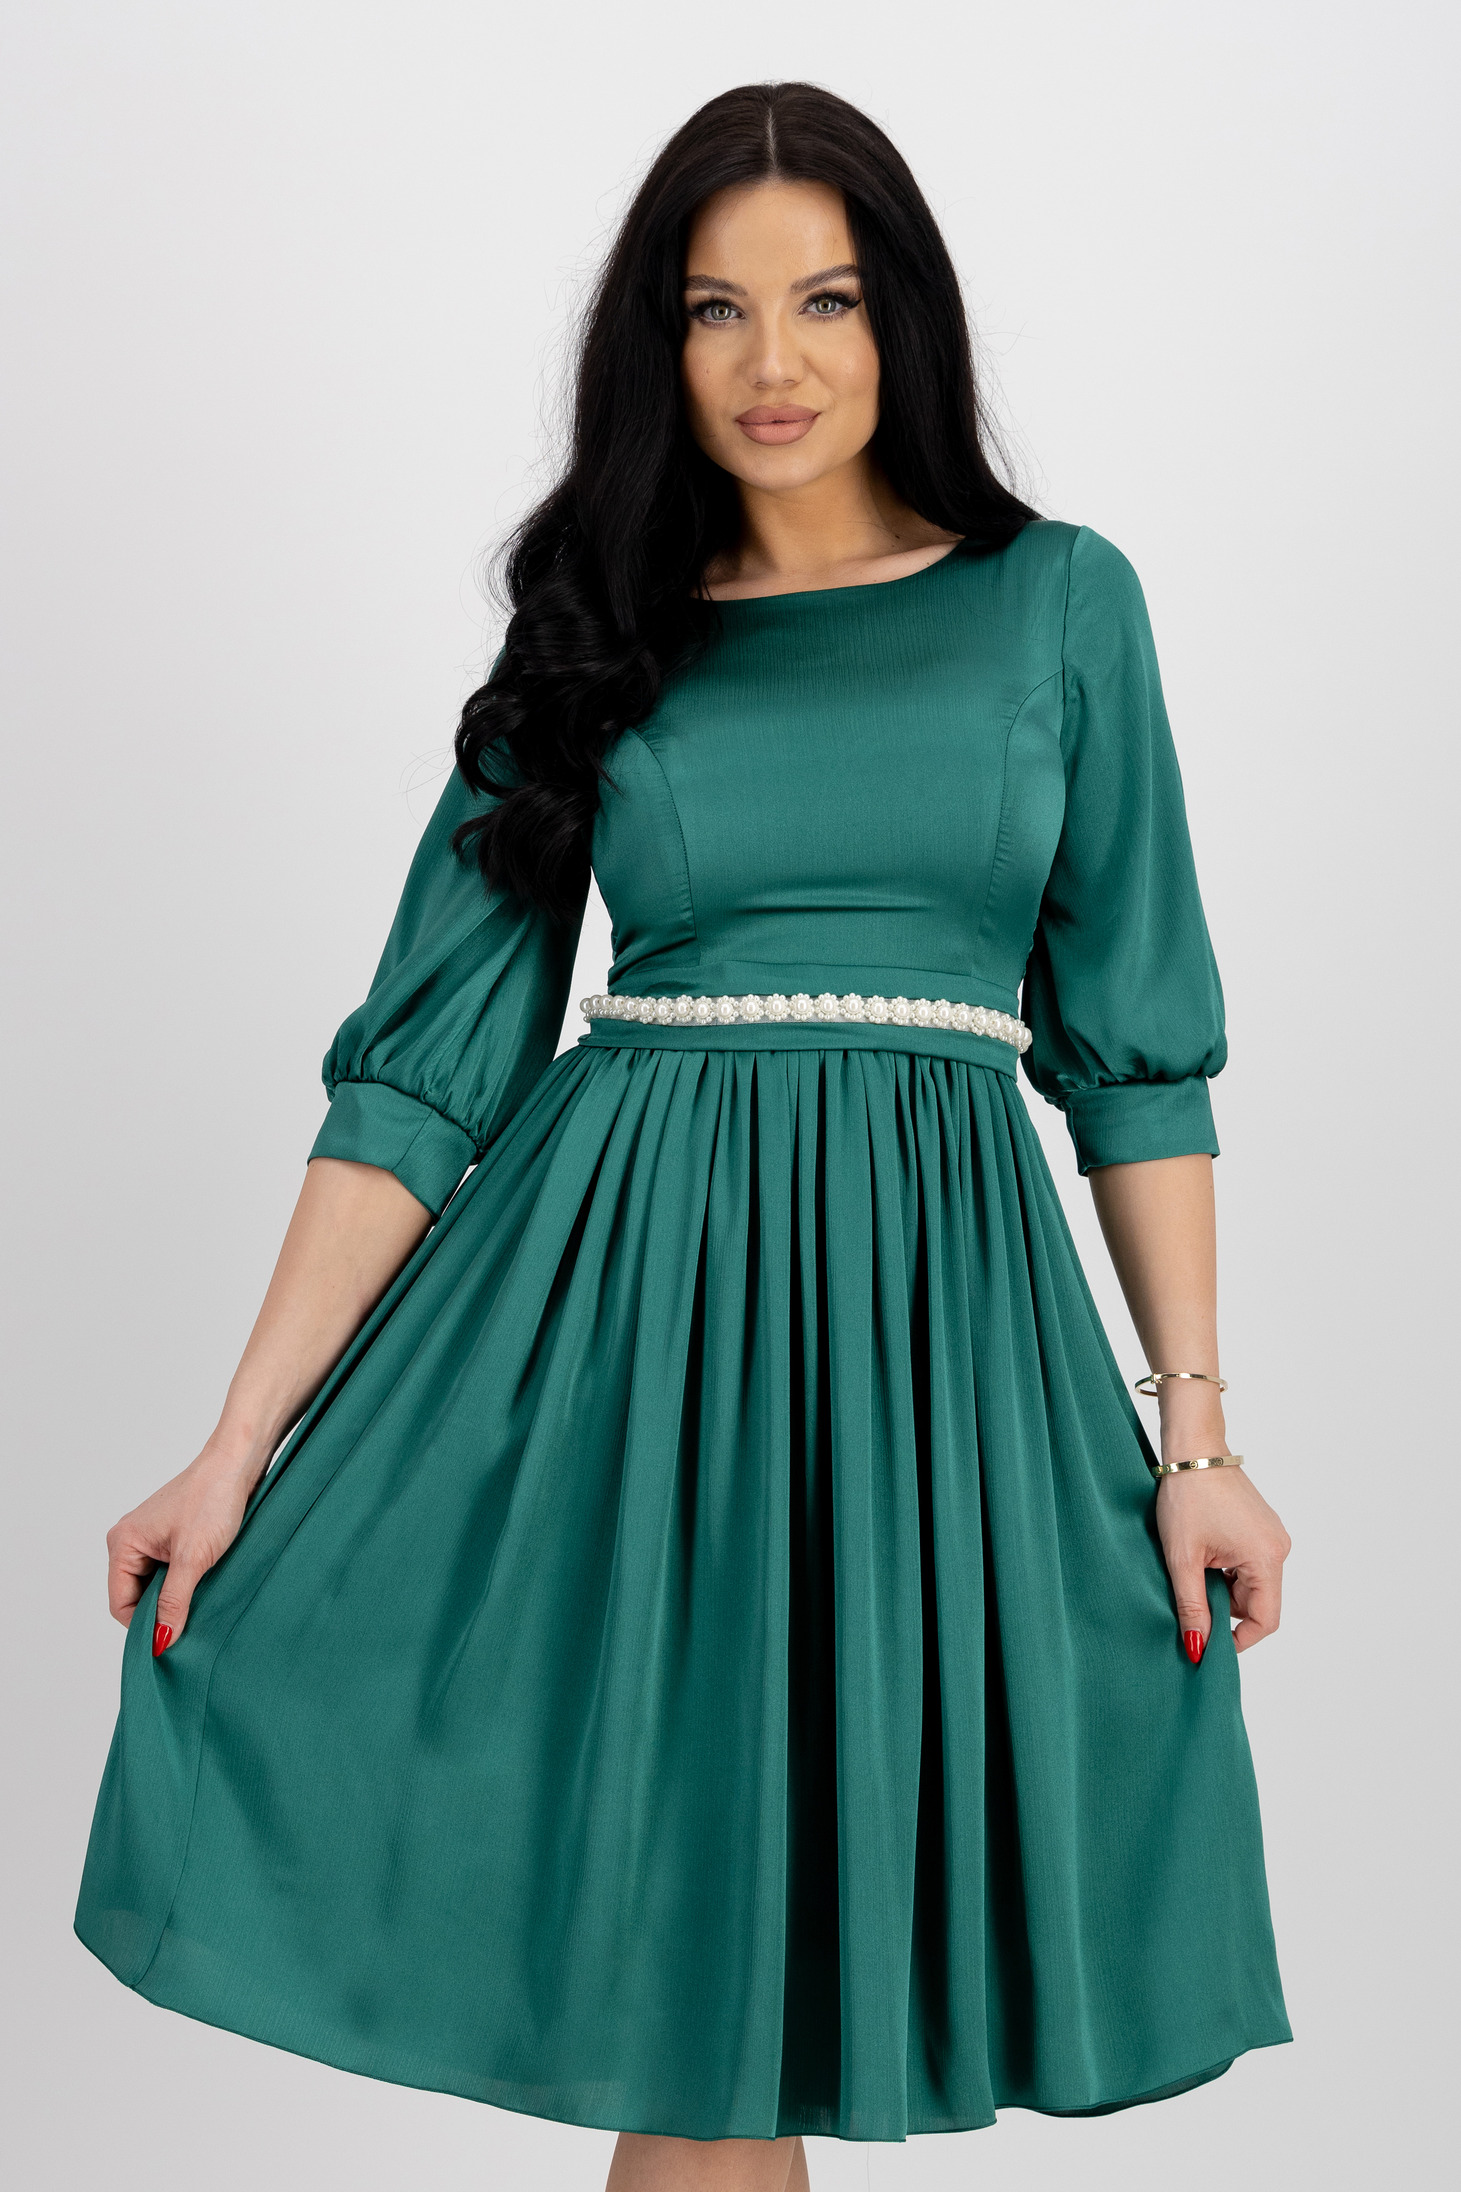 Green Satin Midi Dress in A-line with Pearl Embellishments on Cord - StarShinerS 1 - StarShinerS.com